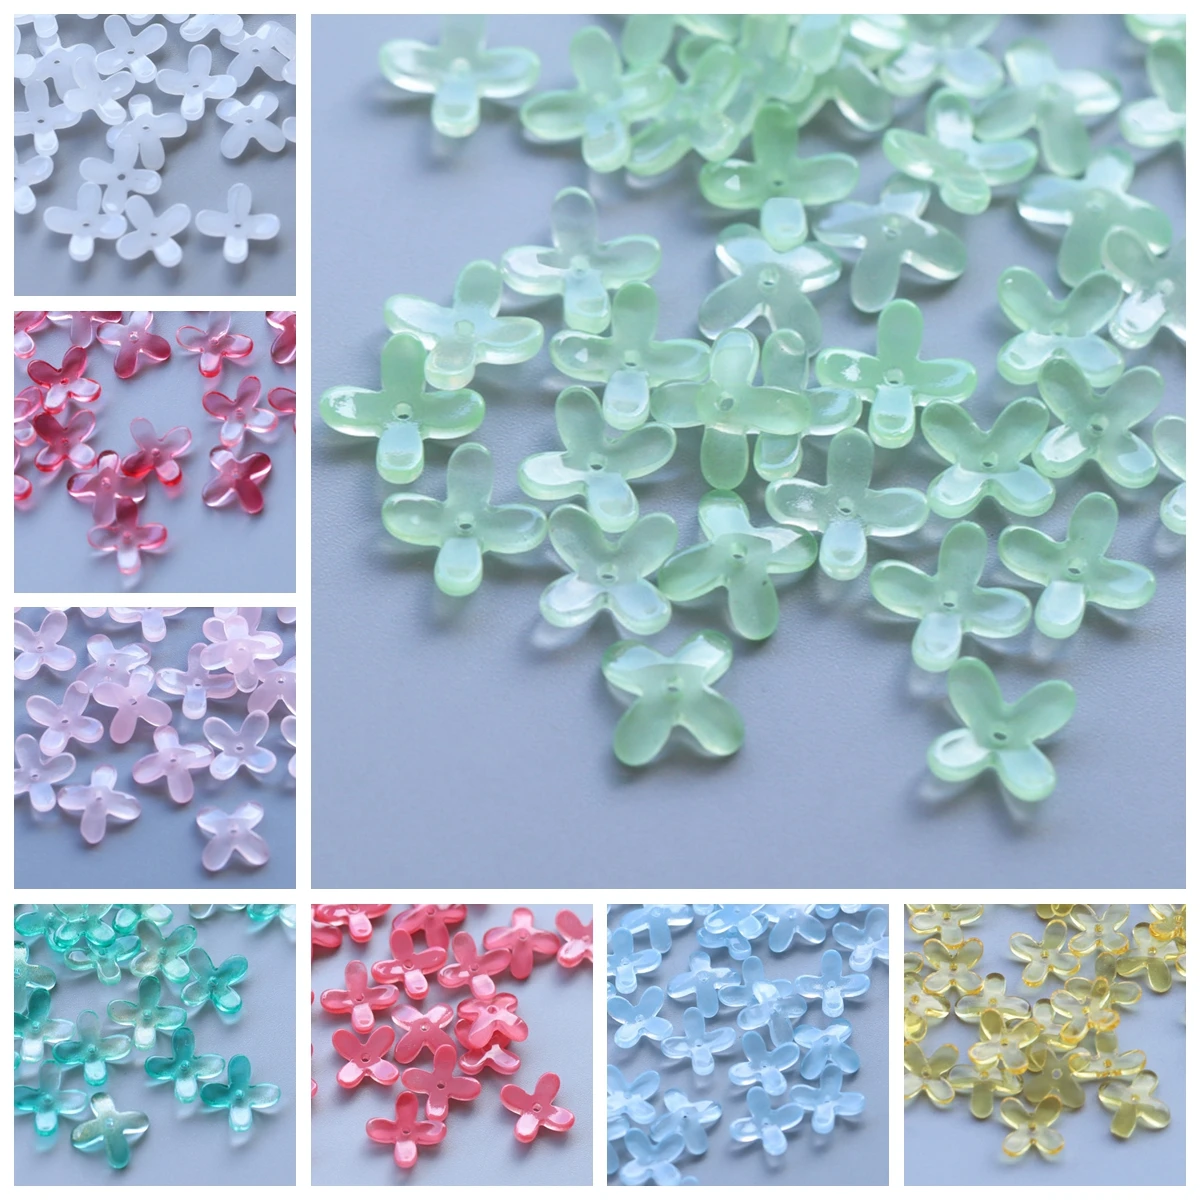 20pcs Cross Flower Shape 12mm Lampwork Crystal Glass Loose Beads Lot For Jewelry Making DIY Crafts Findings